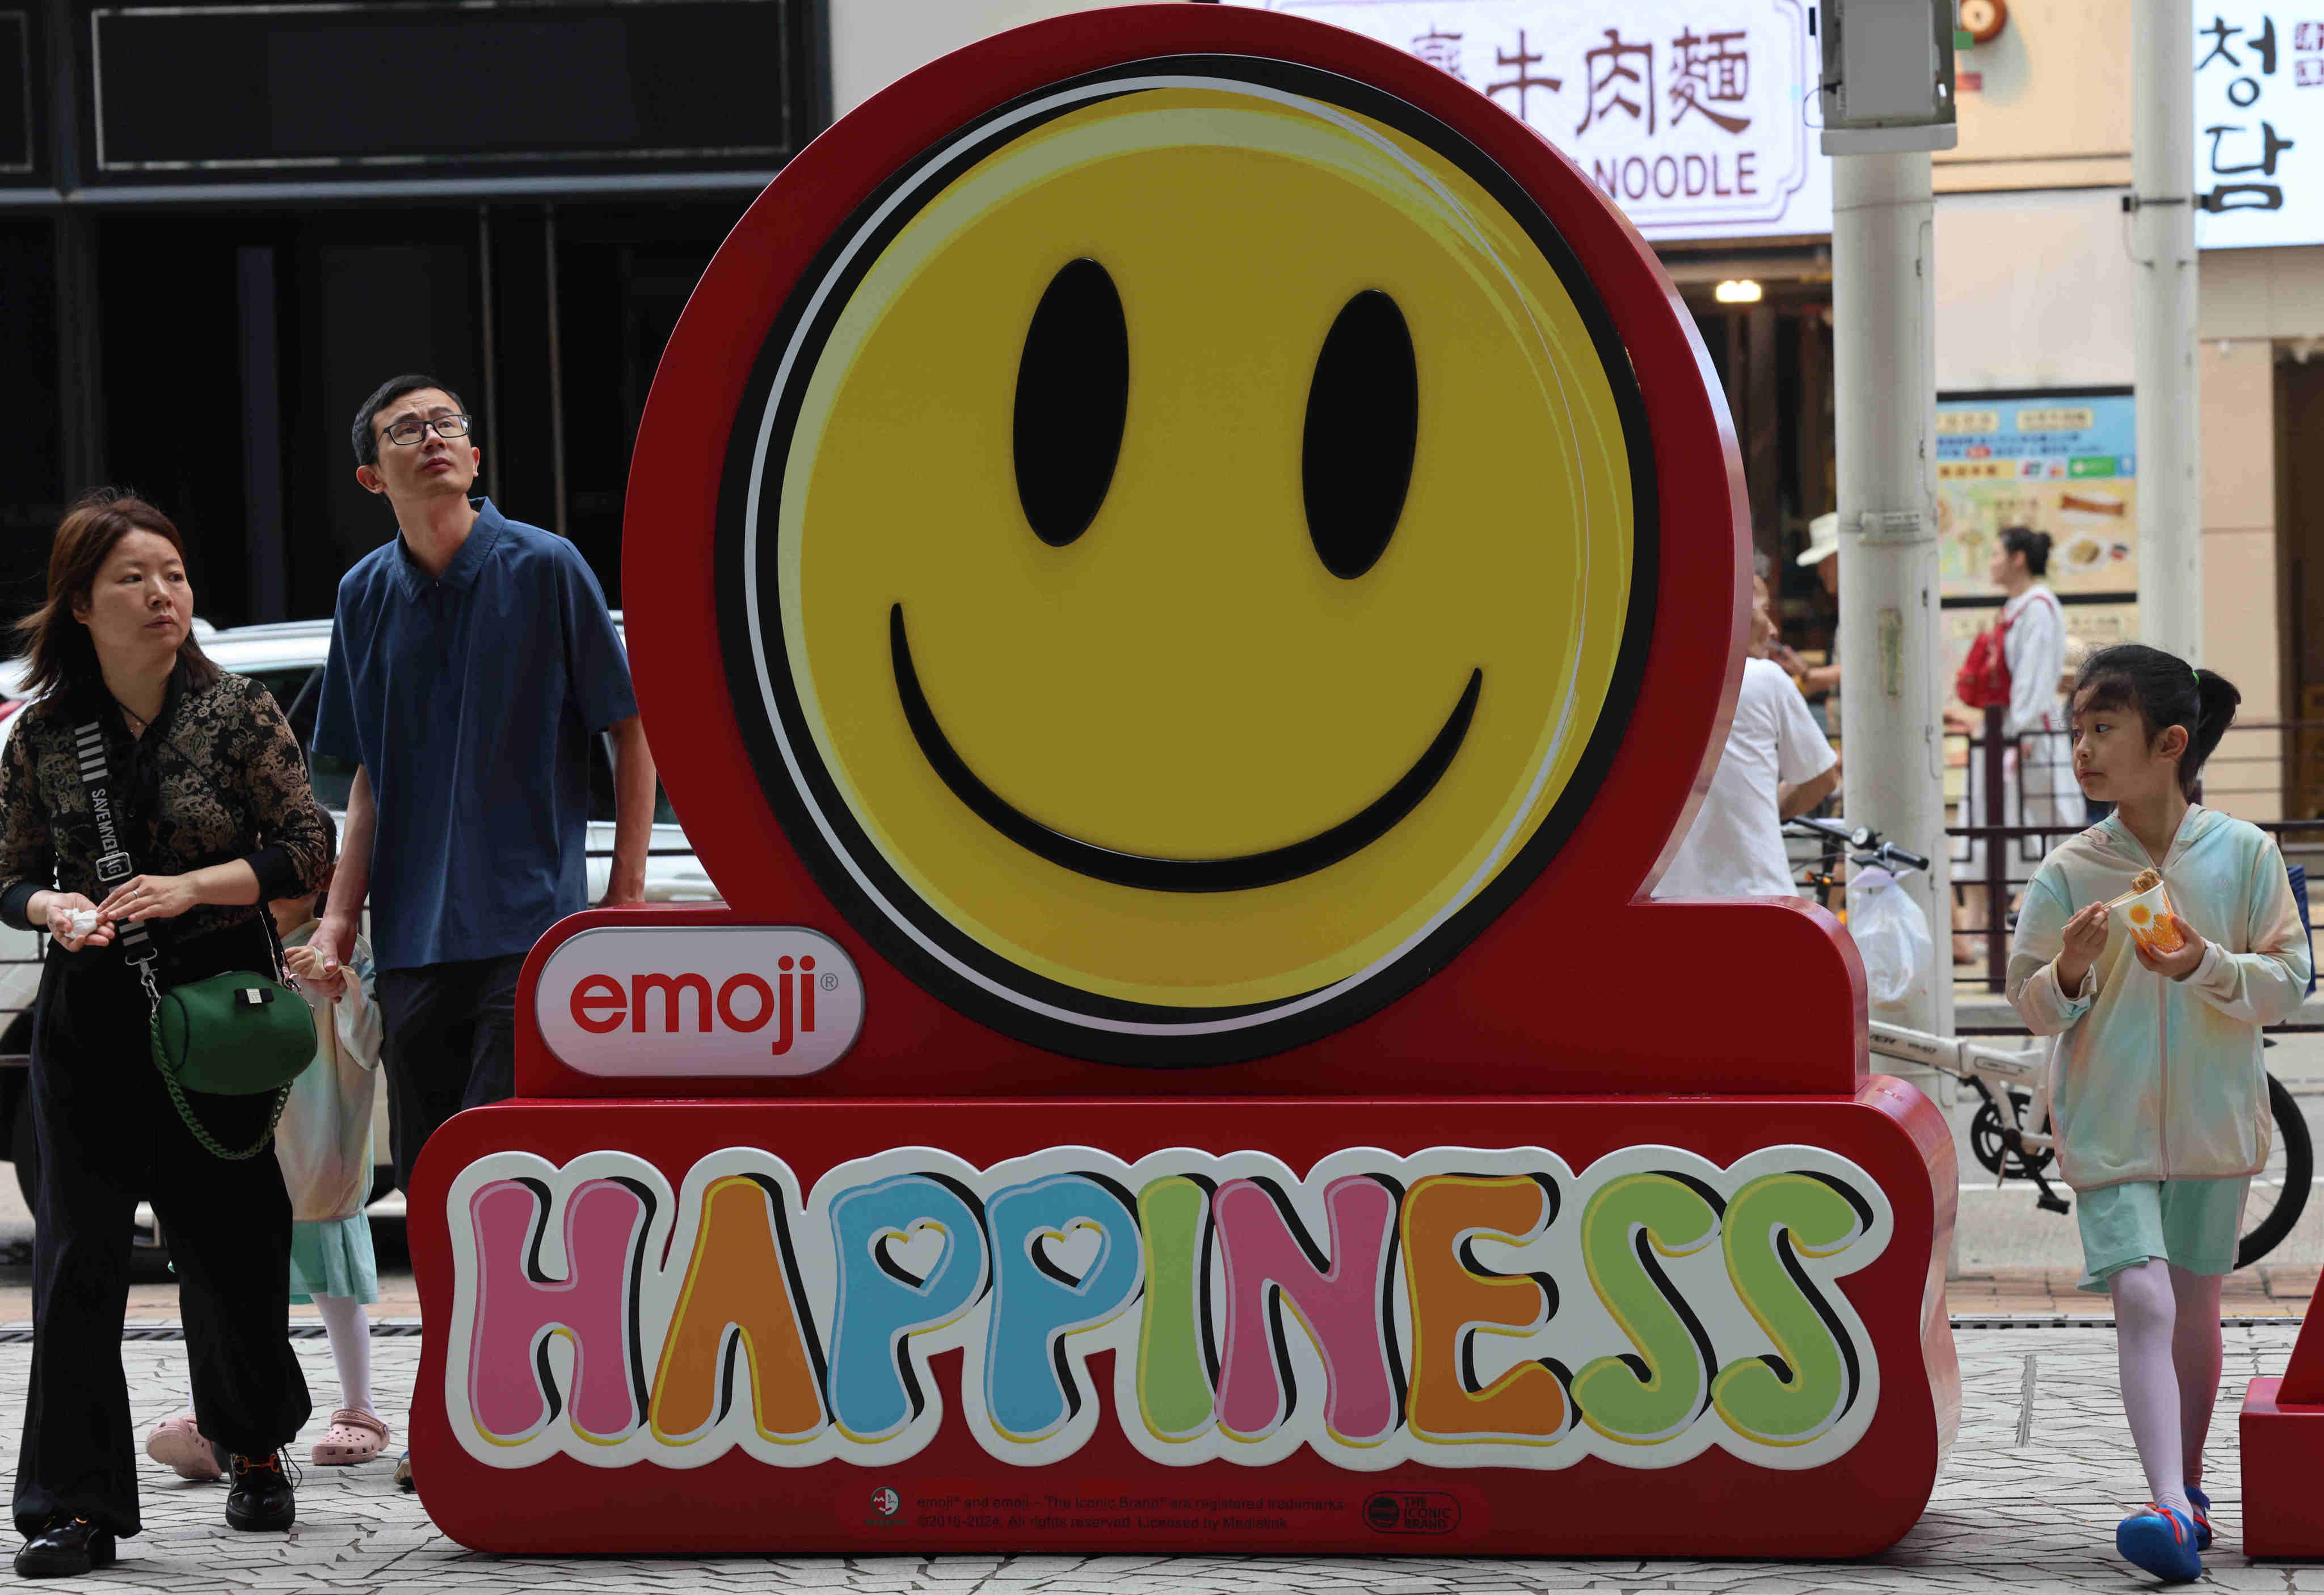 About 60 per cent of Hong Kong families reported high levels of happiness in a recent survey. Photo: Jelly Tse